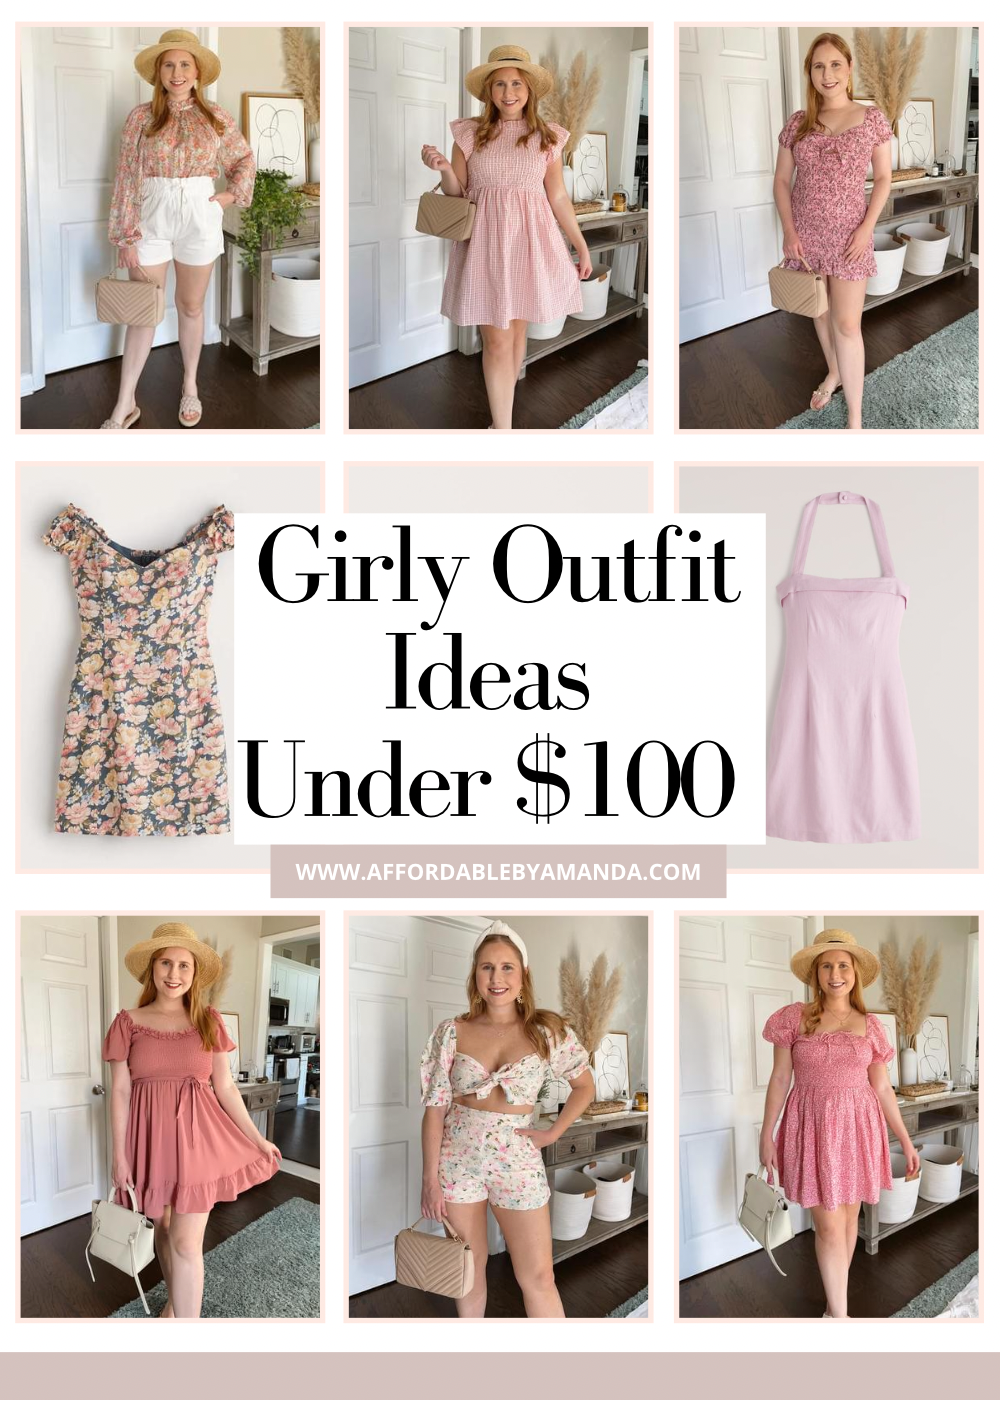 Affordable Walmart Outfits for Spring 2022 - Affordable by Amanda